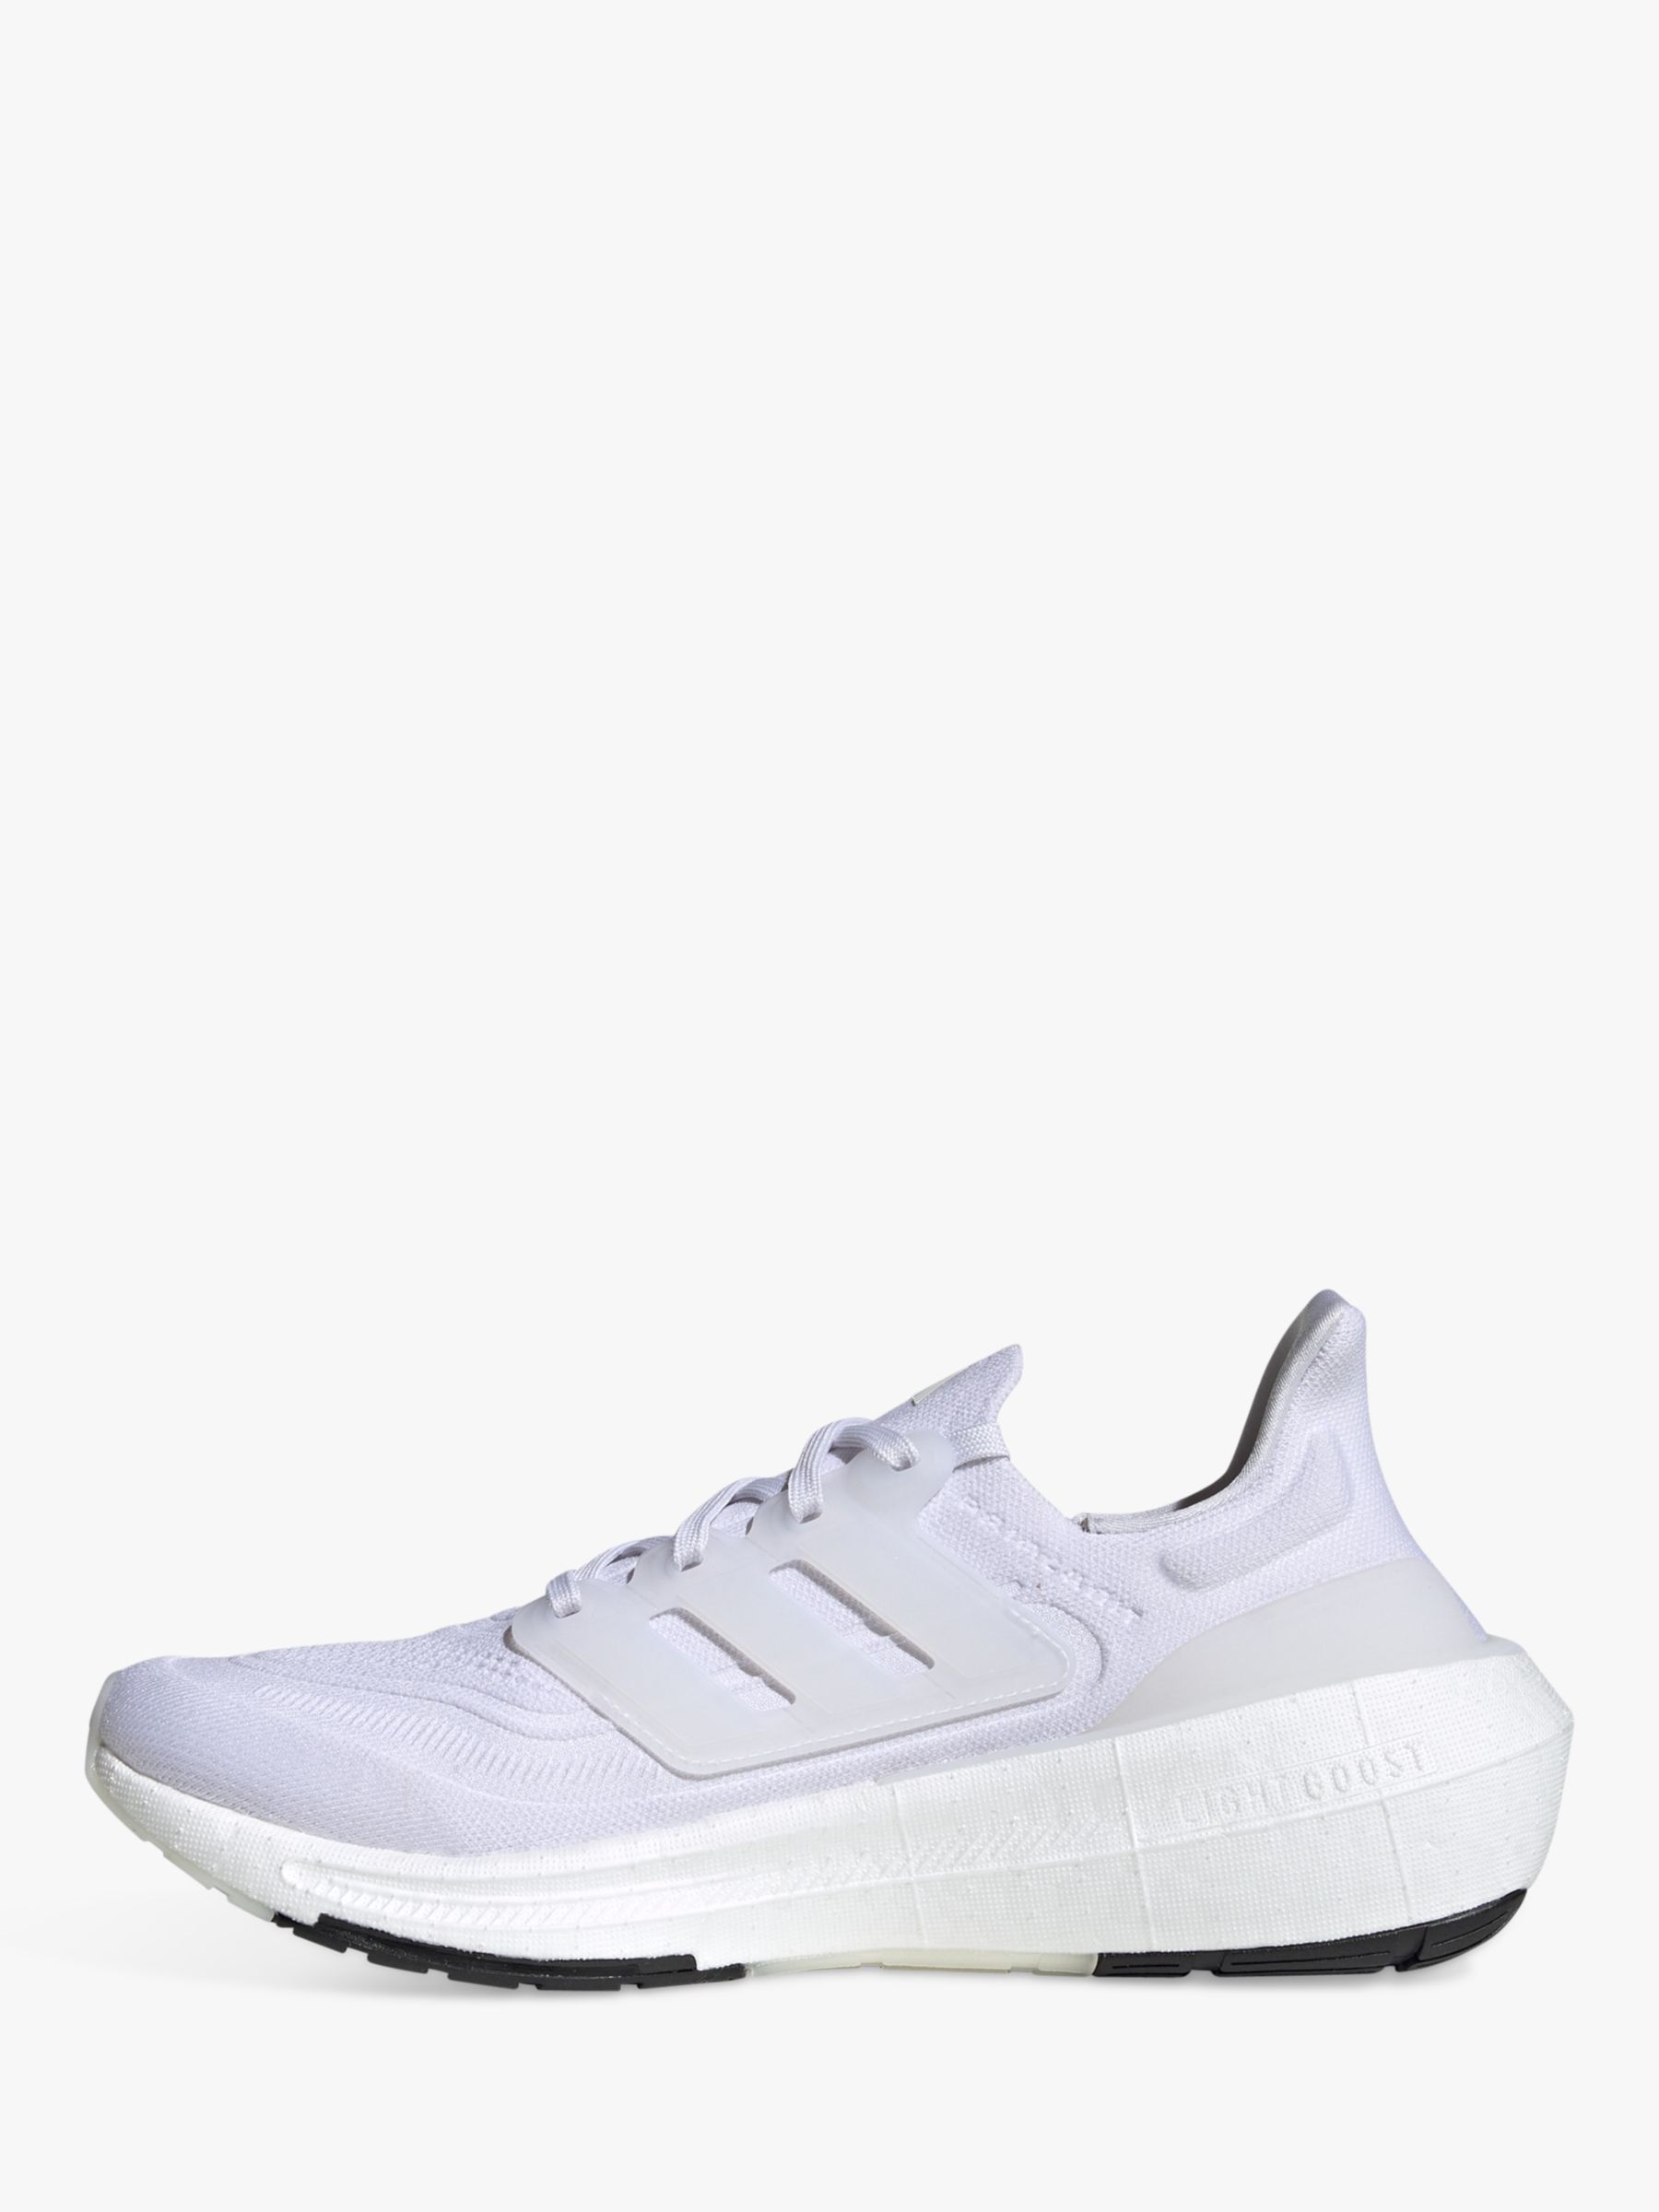 adidas Ultraboost Light Men's Running Shoes, White/Crystal White at ...